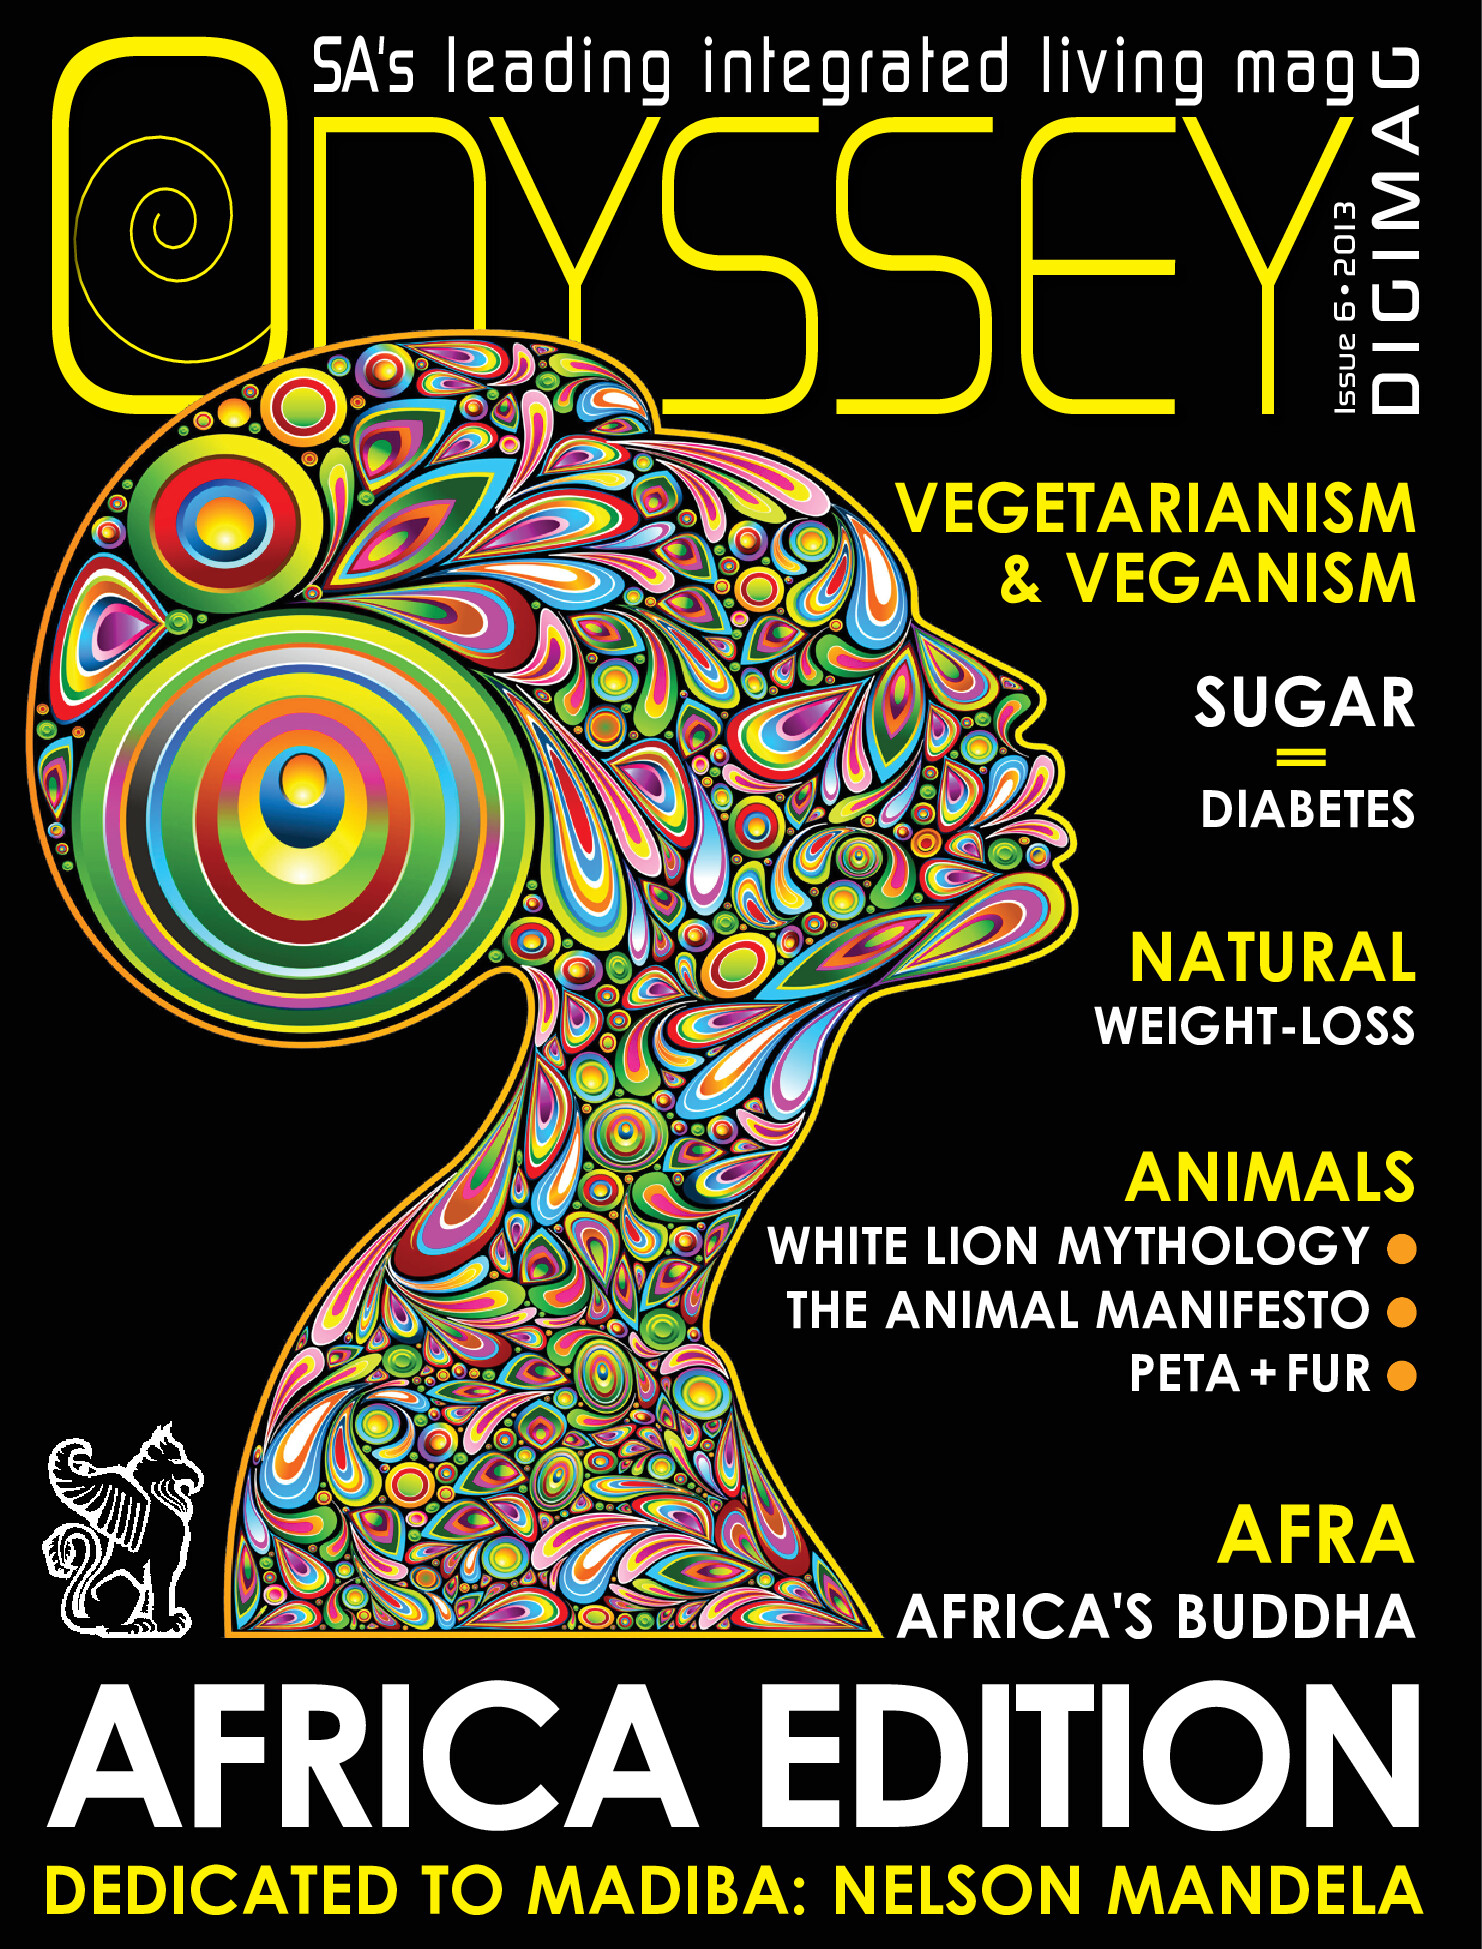 Issue 6 2013